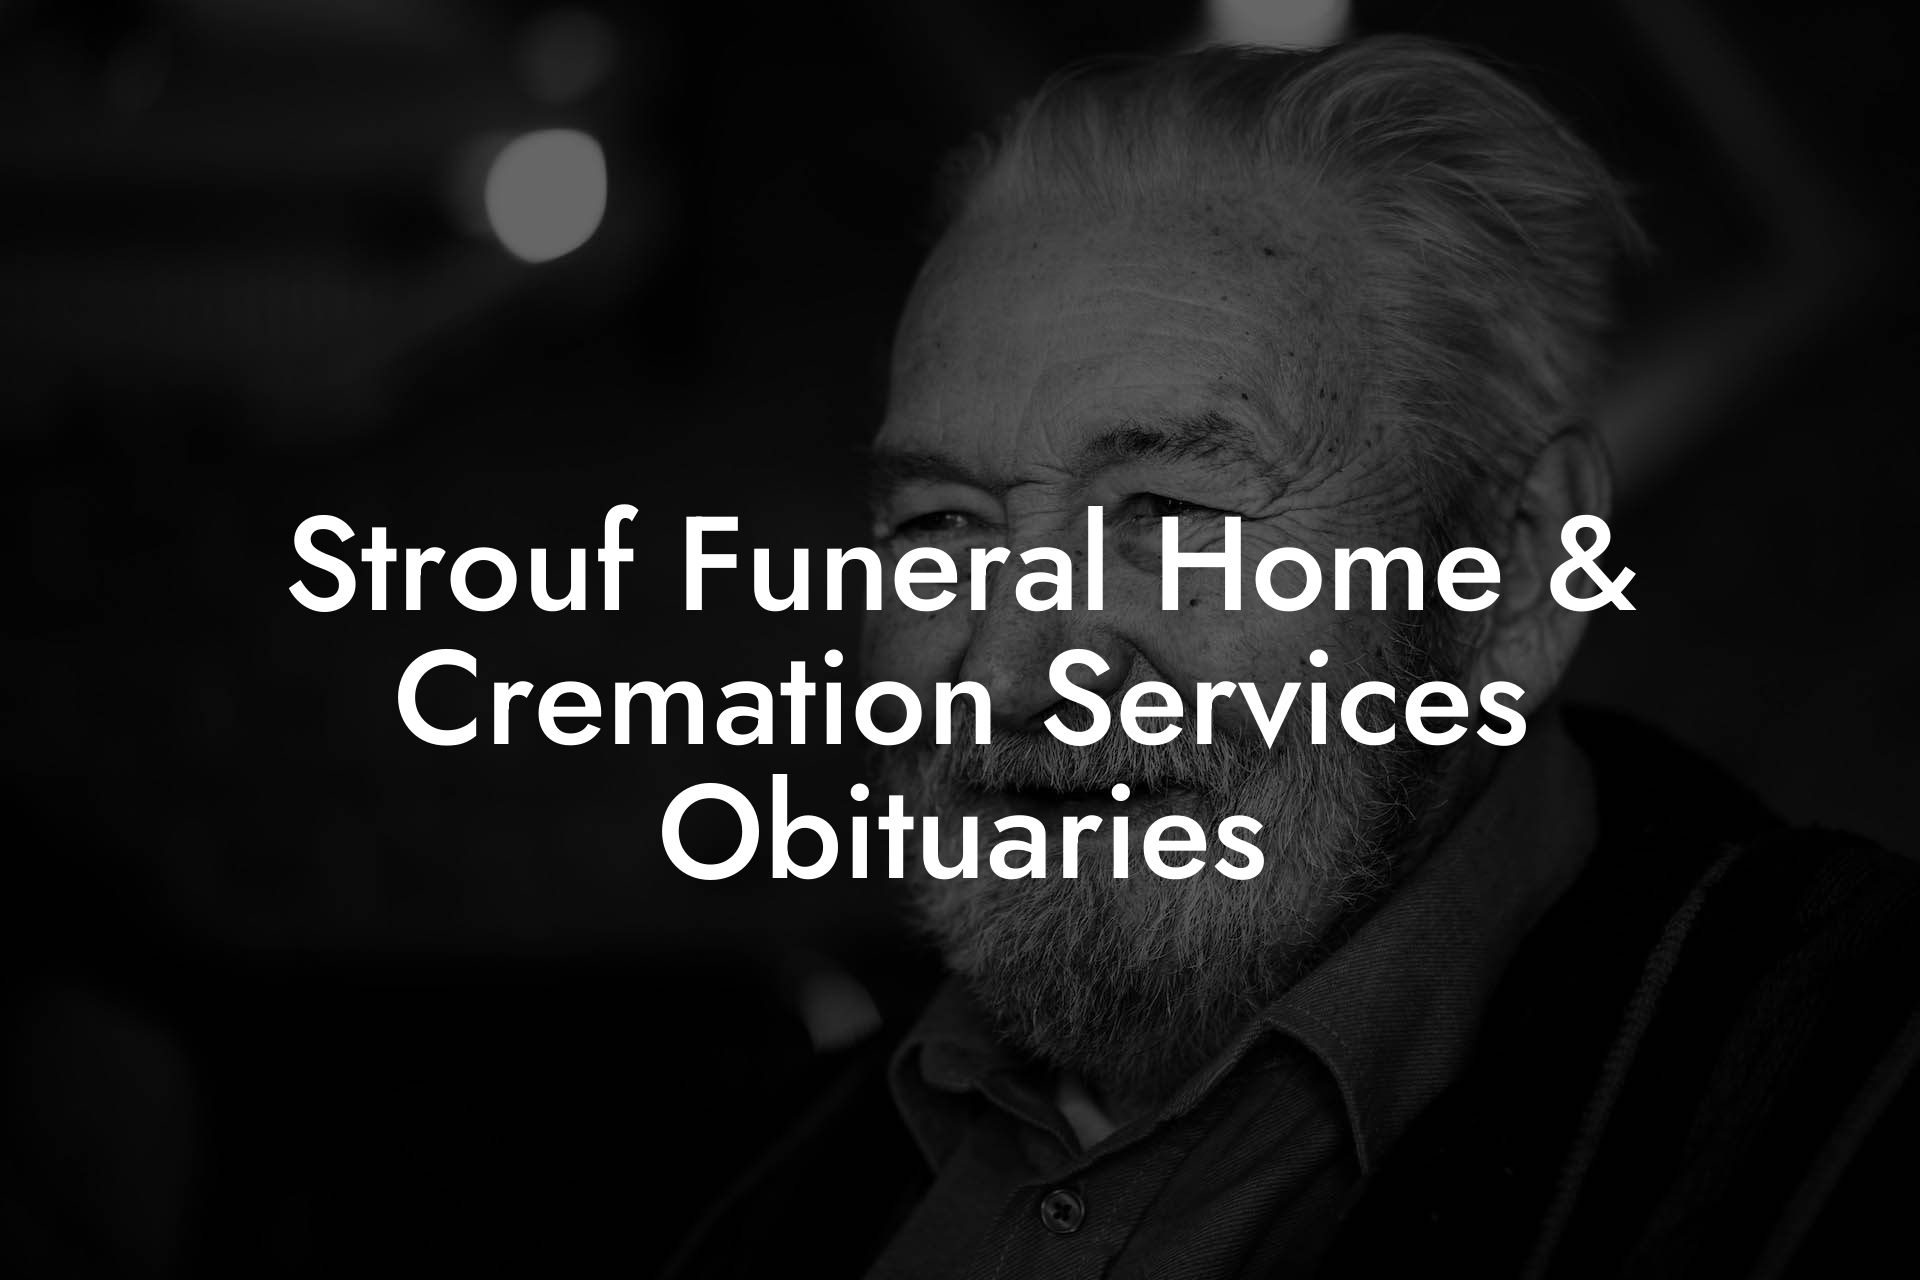 Strouf Funeral Home & Cremation Services Obituaries